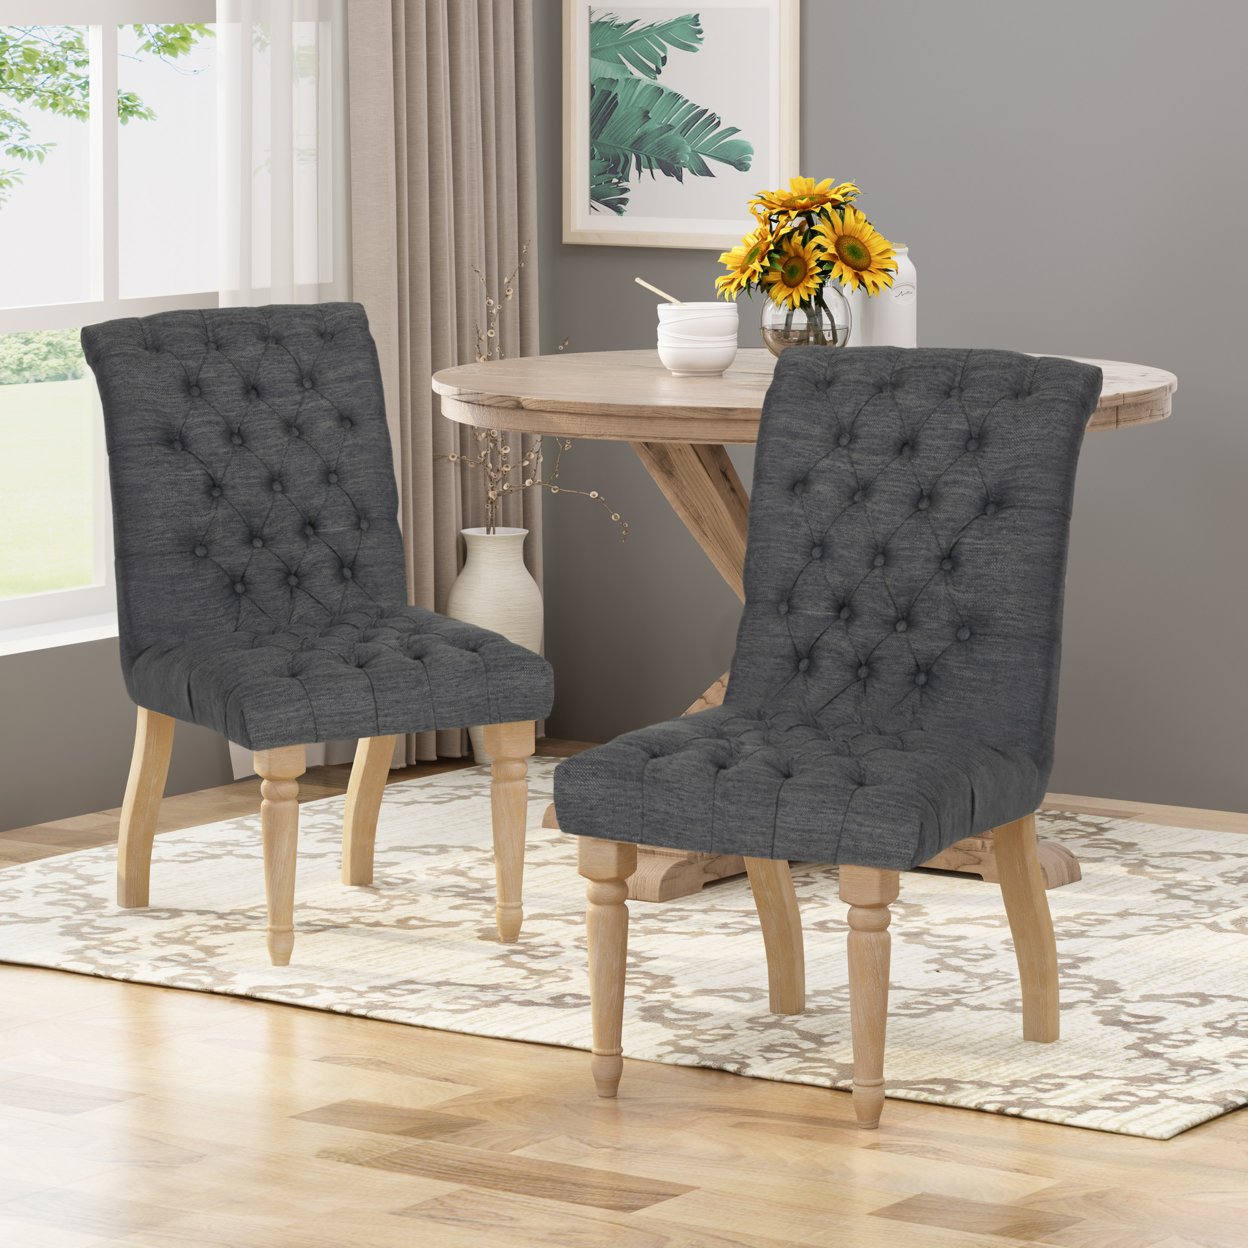 Terrance Tufted Fabric Dining Chair (Set Of 2) - Charcoal + Natural